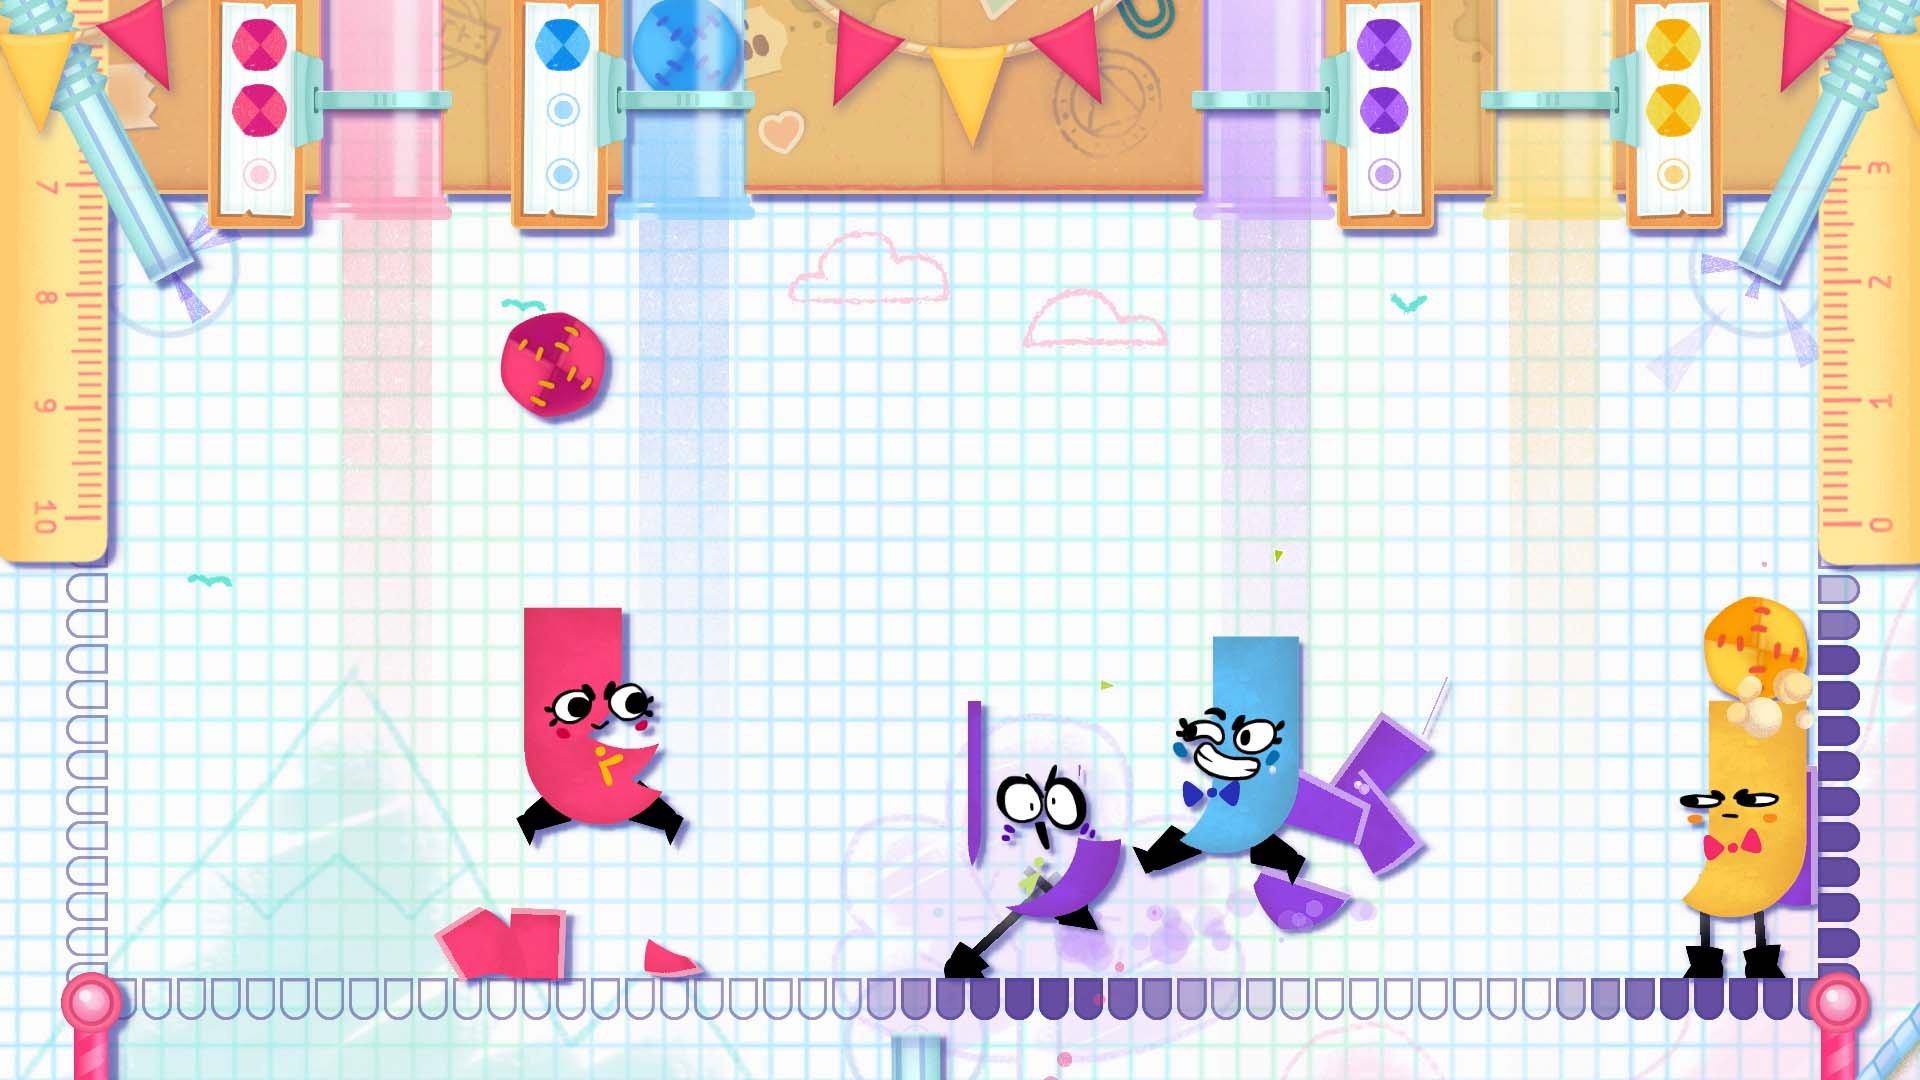 snipperclips price